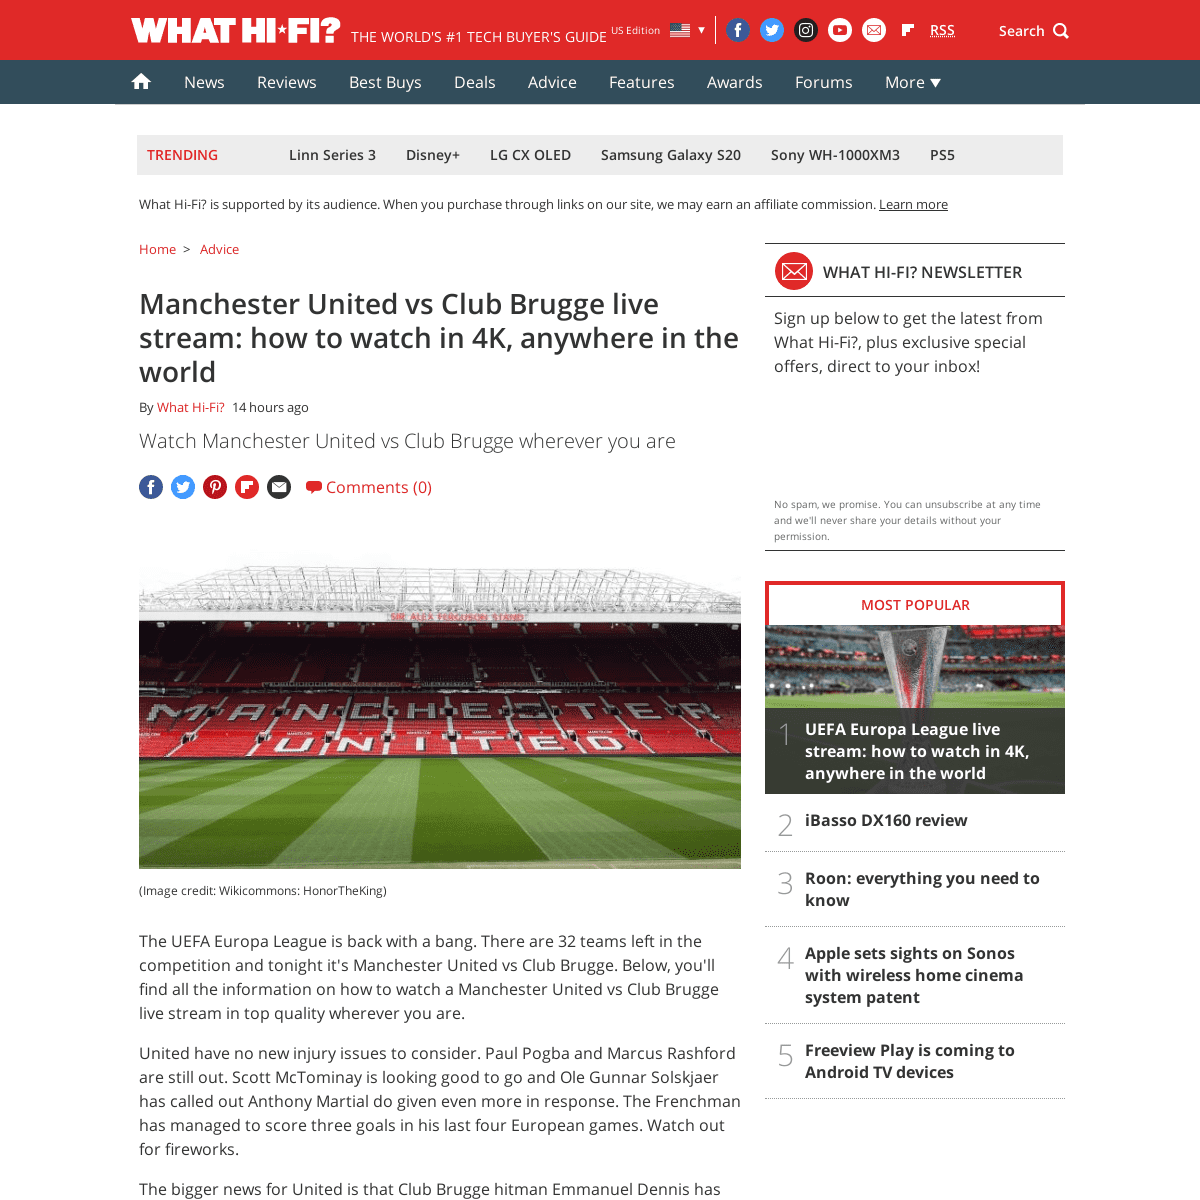 A complete backup of www.whathifi.com/us/advice/manchester-united-vs-club-brugge-live-stream-how-to-watch-in-4k-anywhere-in-the-